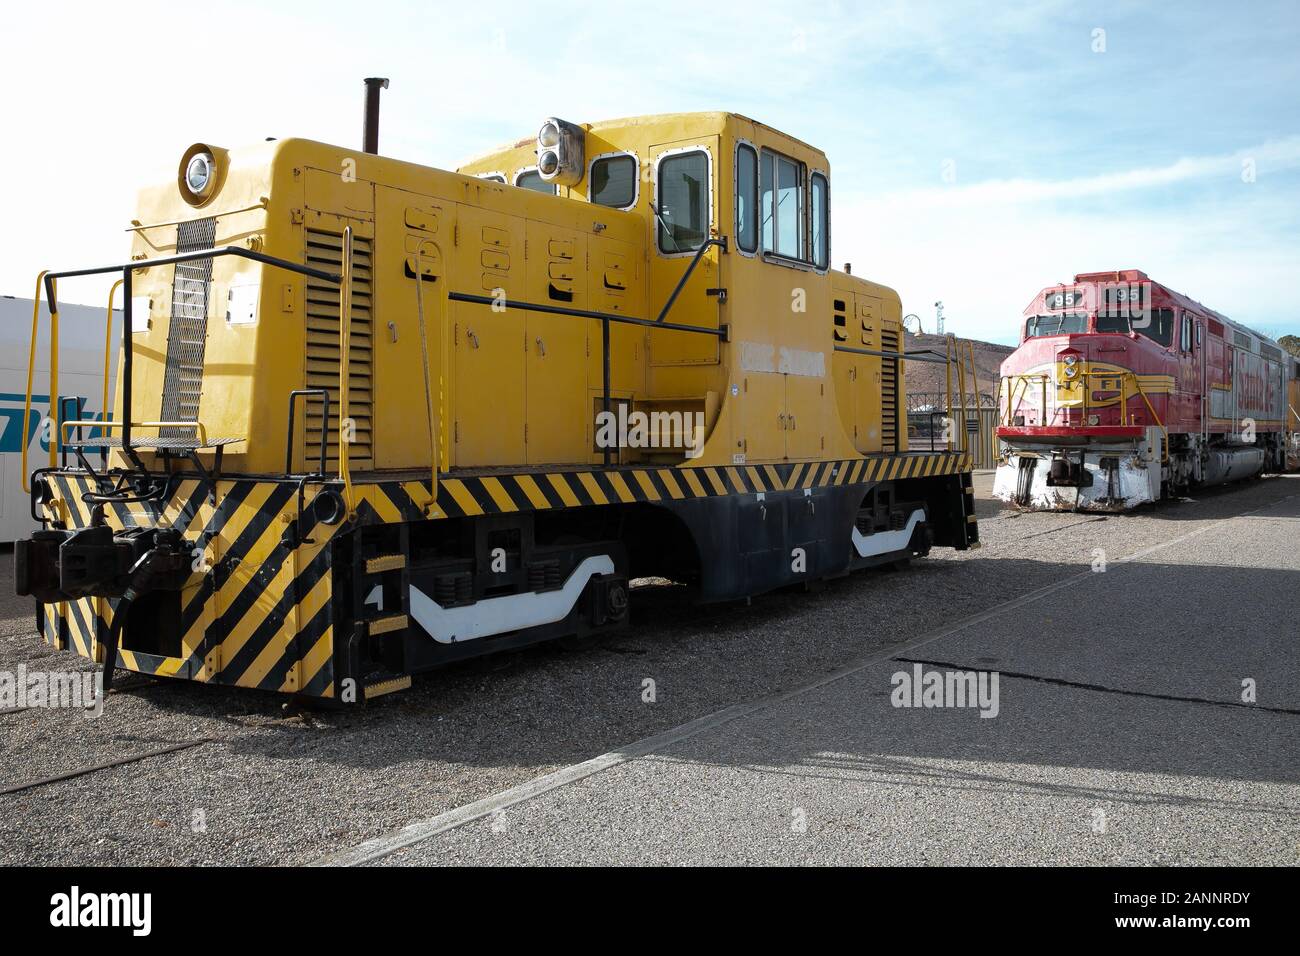 Western America Railroad Museum at Barstow Railway Station in  California, USA Stock Photo